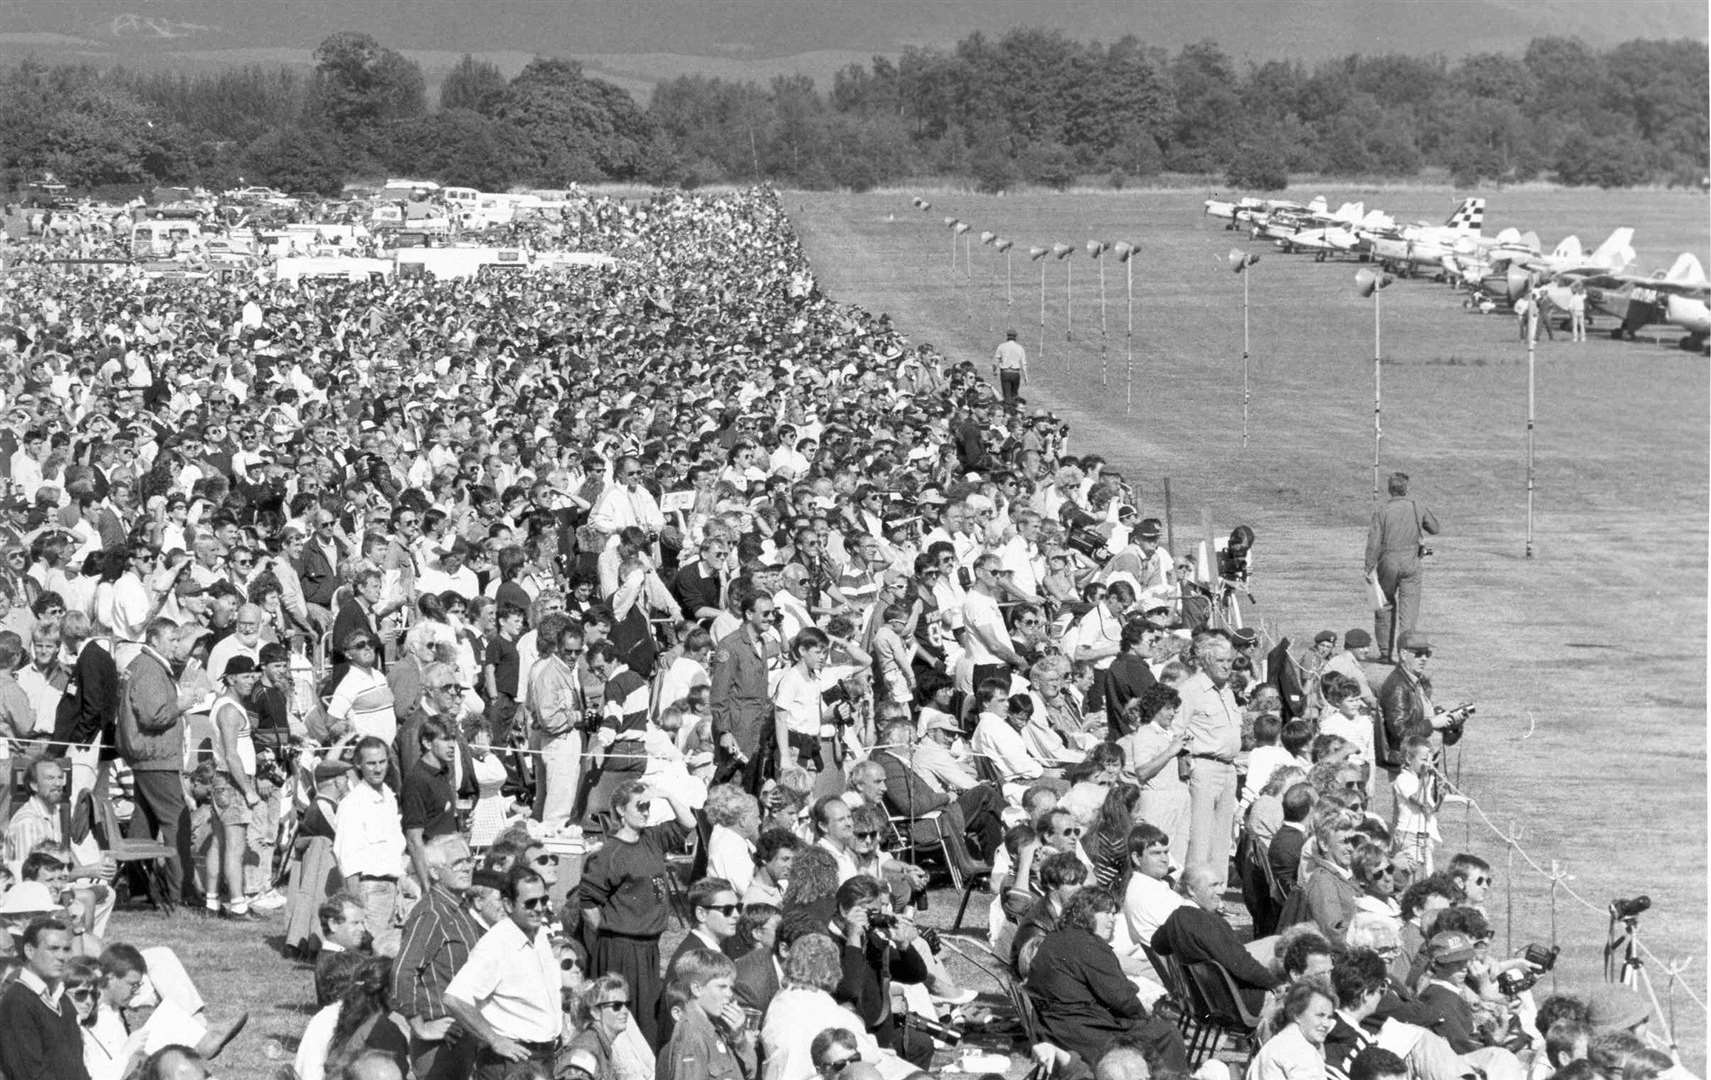 Crowds at The Great Warbirds airshow at West Malling, Kent. August 28, 1989